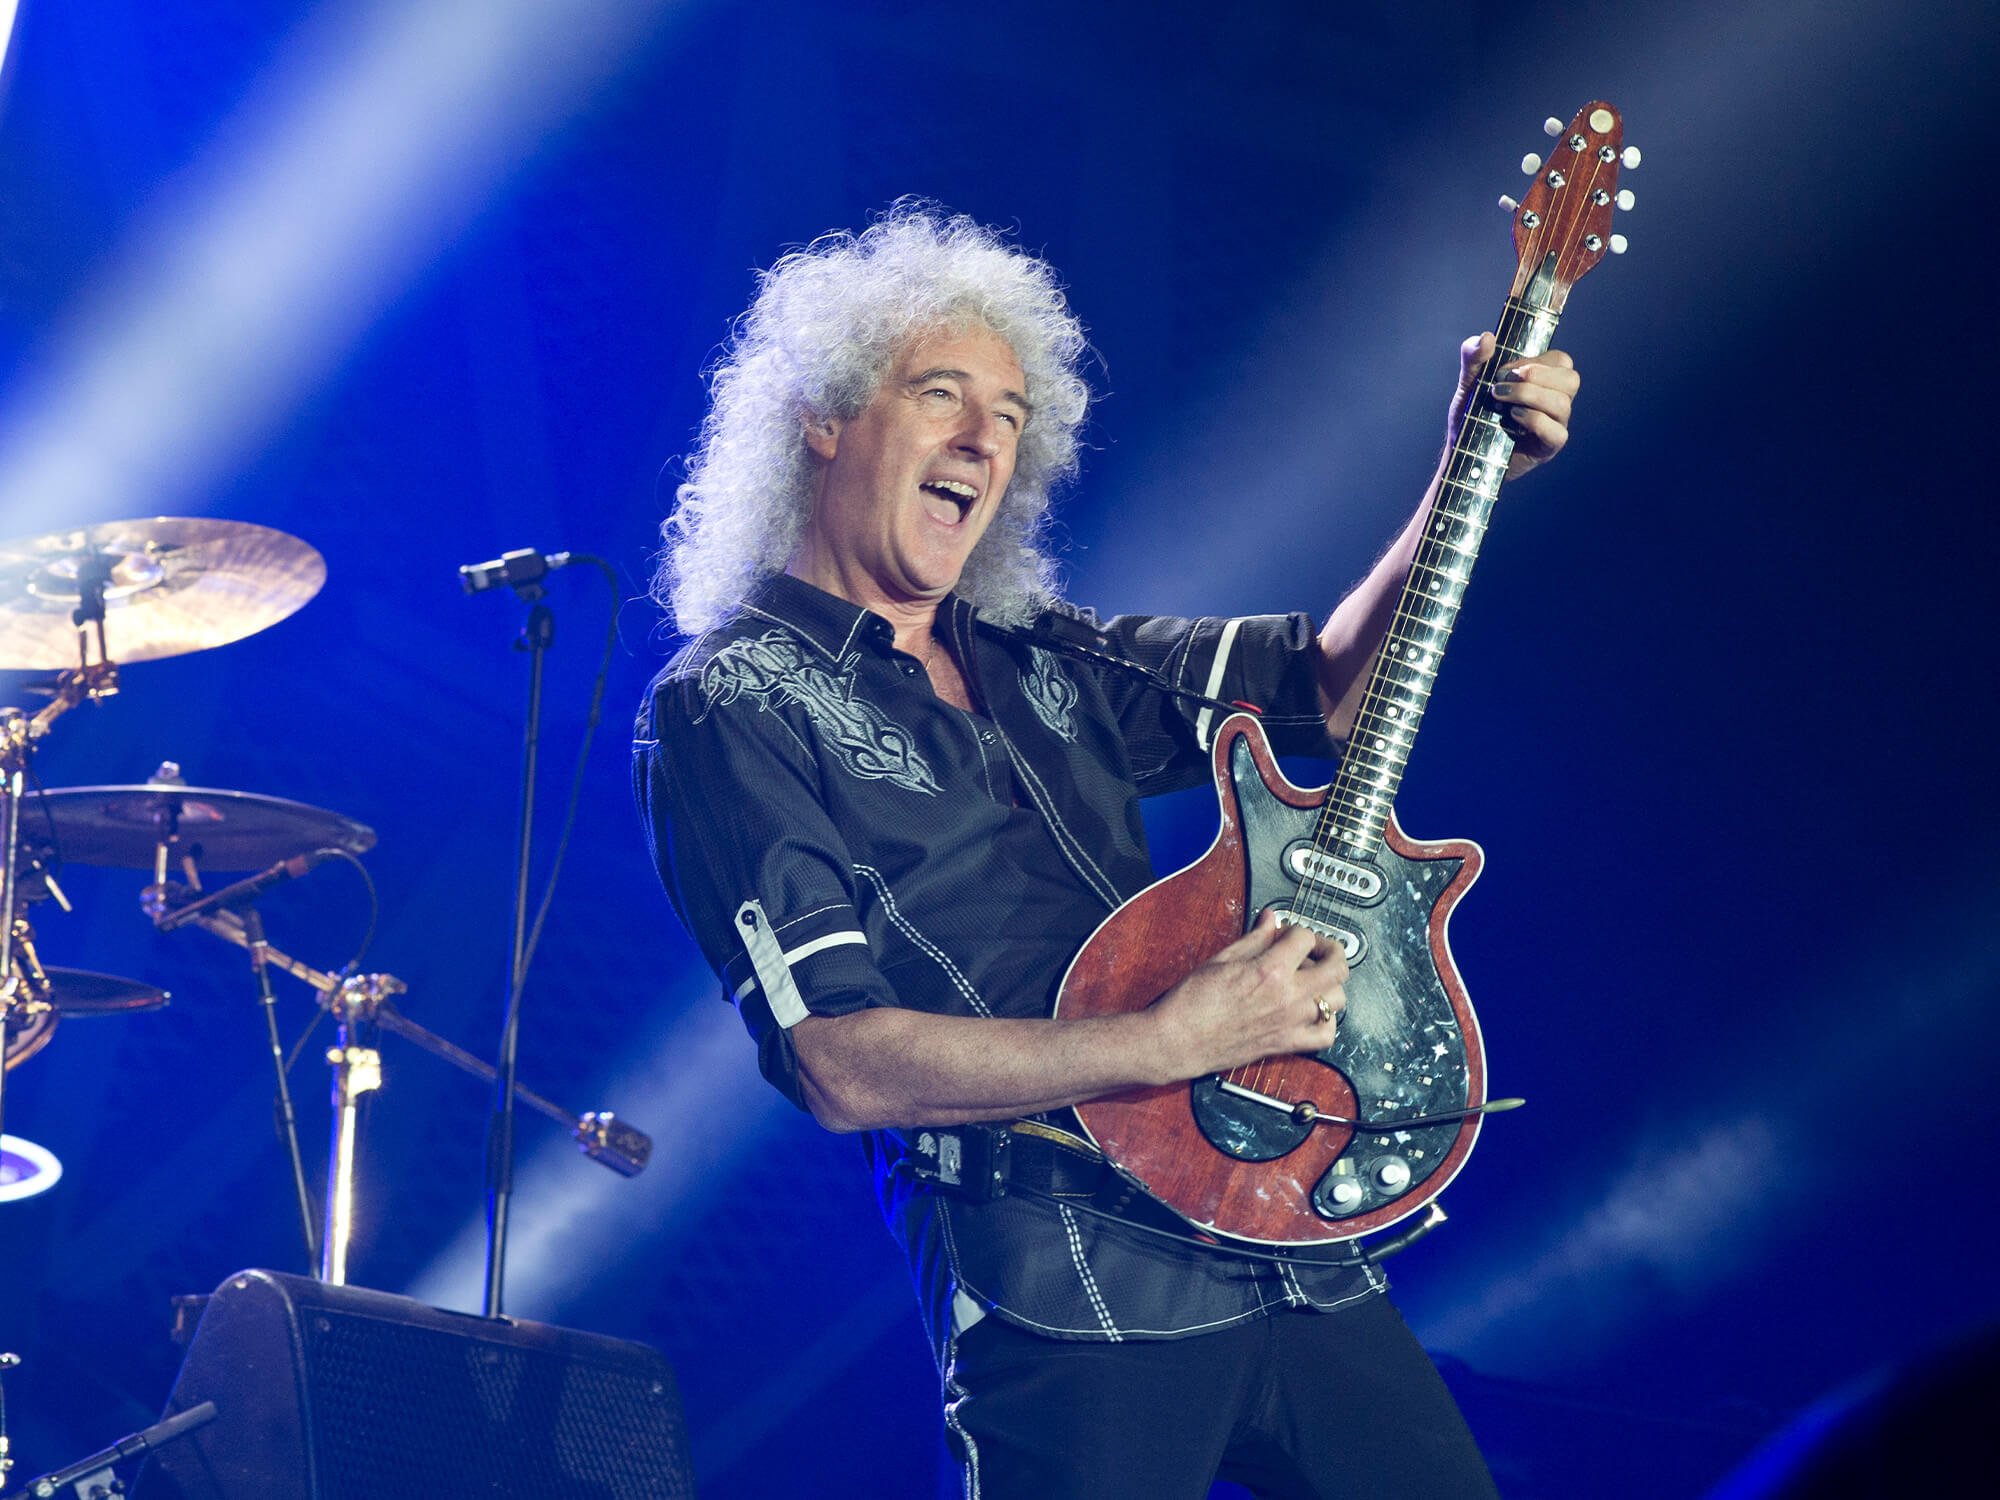 Brian May holding his Red Special up right, with his mouth open in a joyful expression